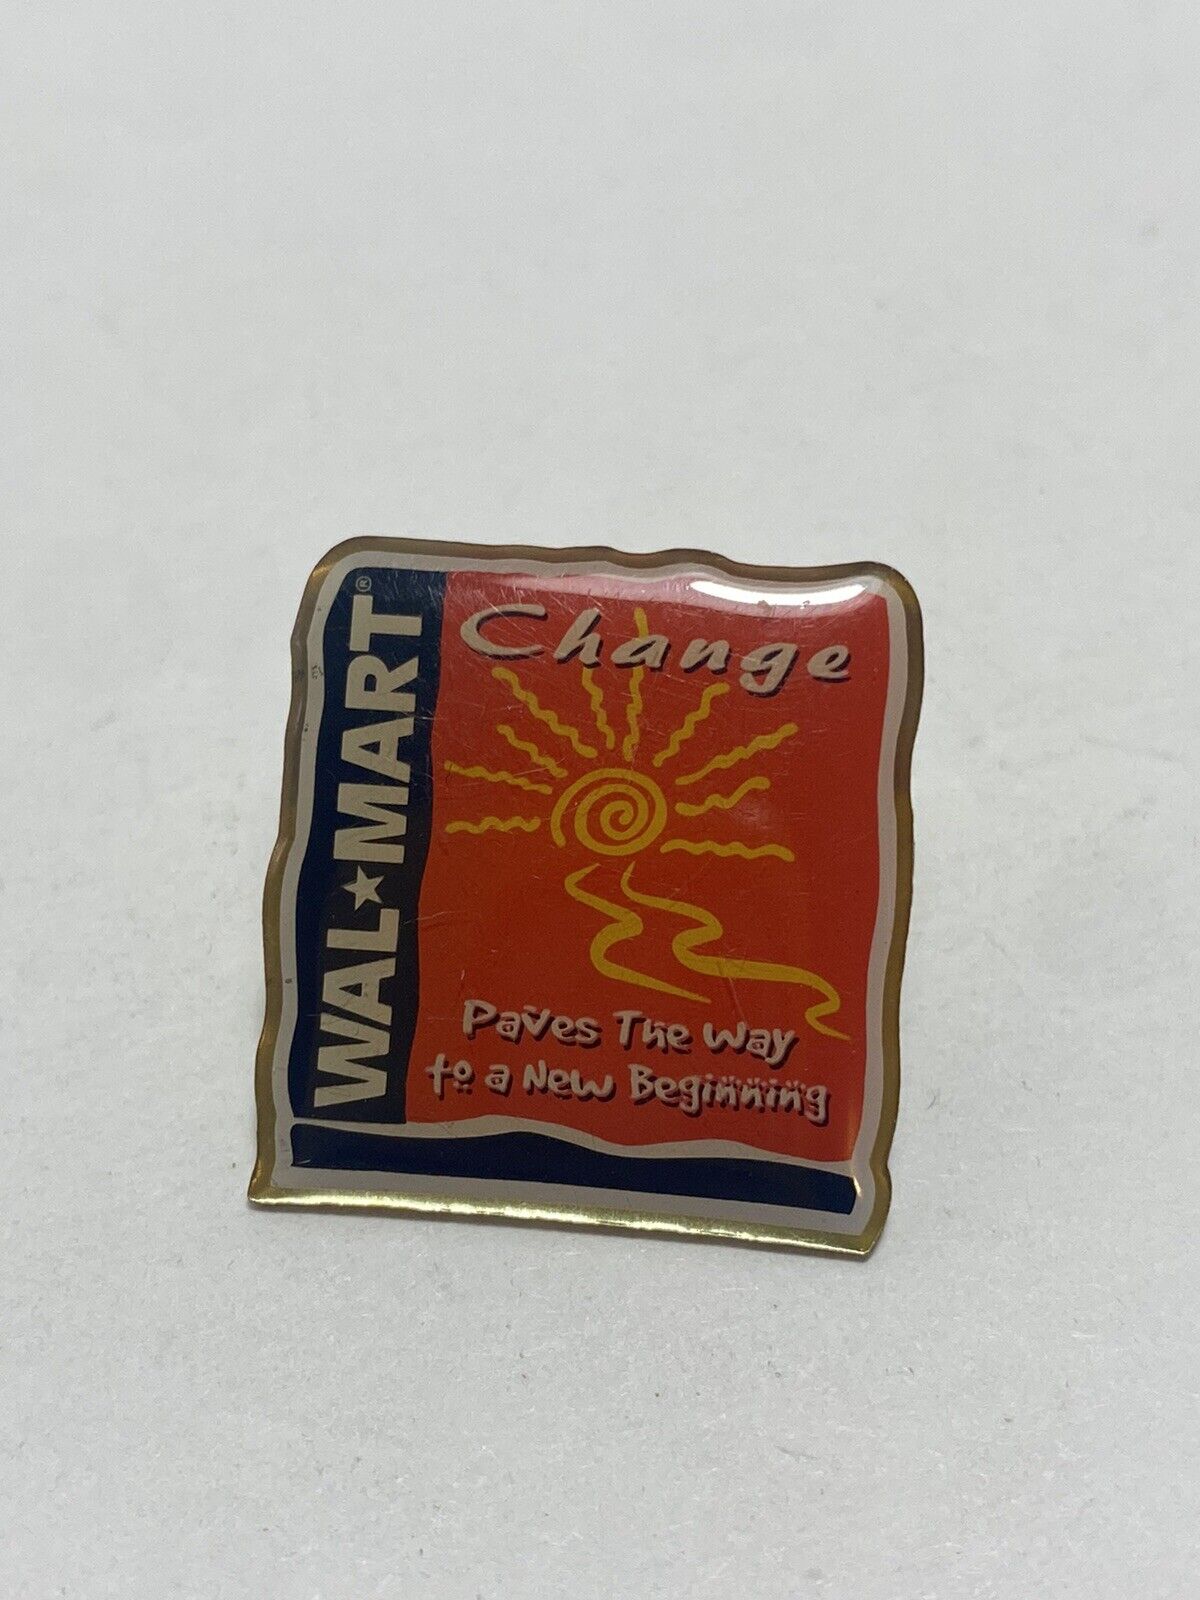 Walmart Employee Lapel pin Change Paves The Way To A New Beginning Wal-mart